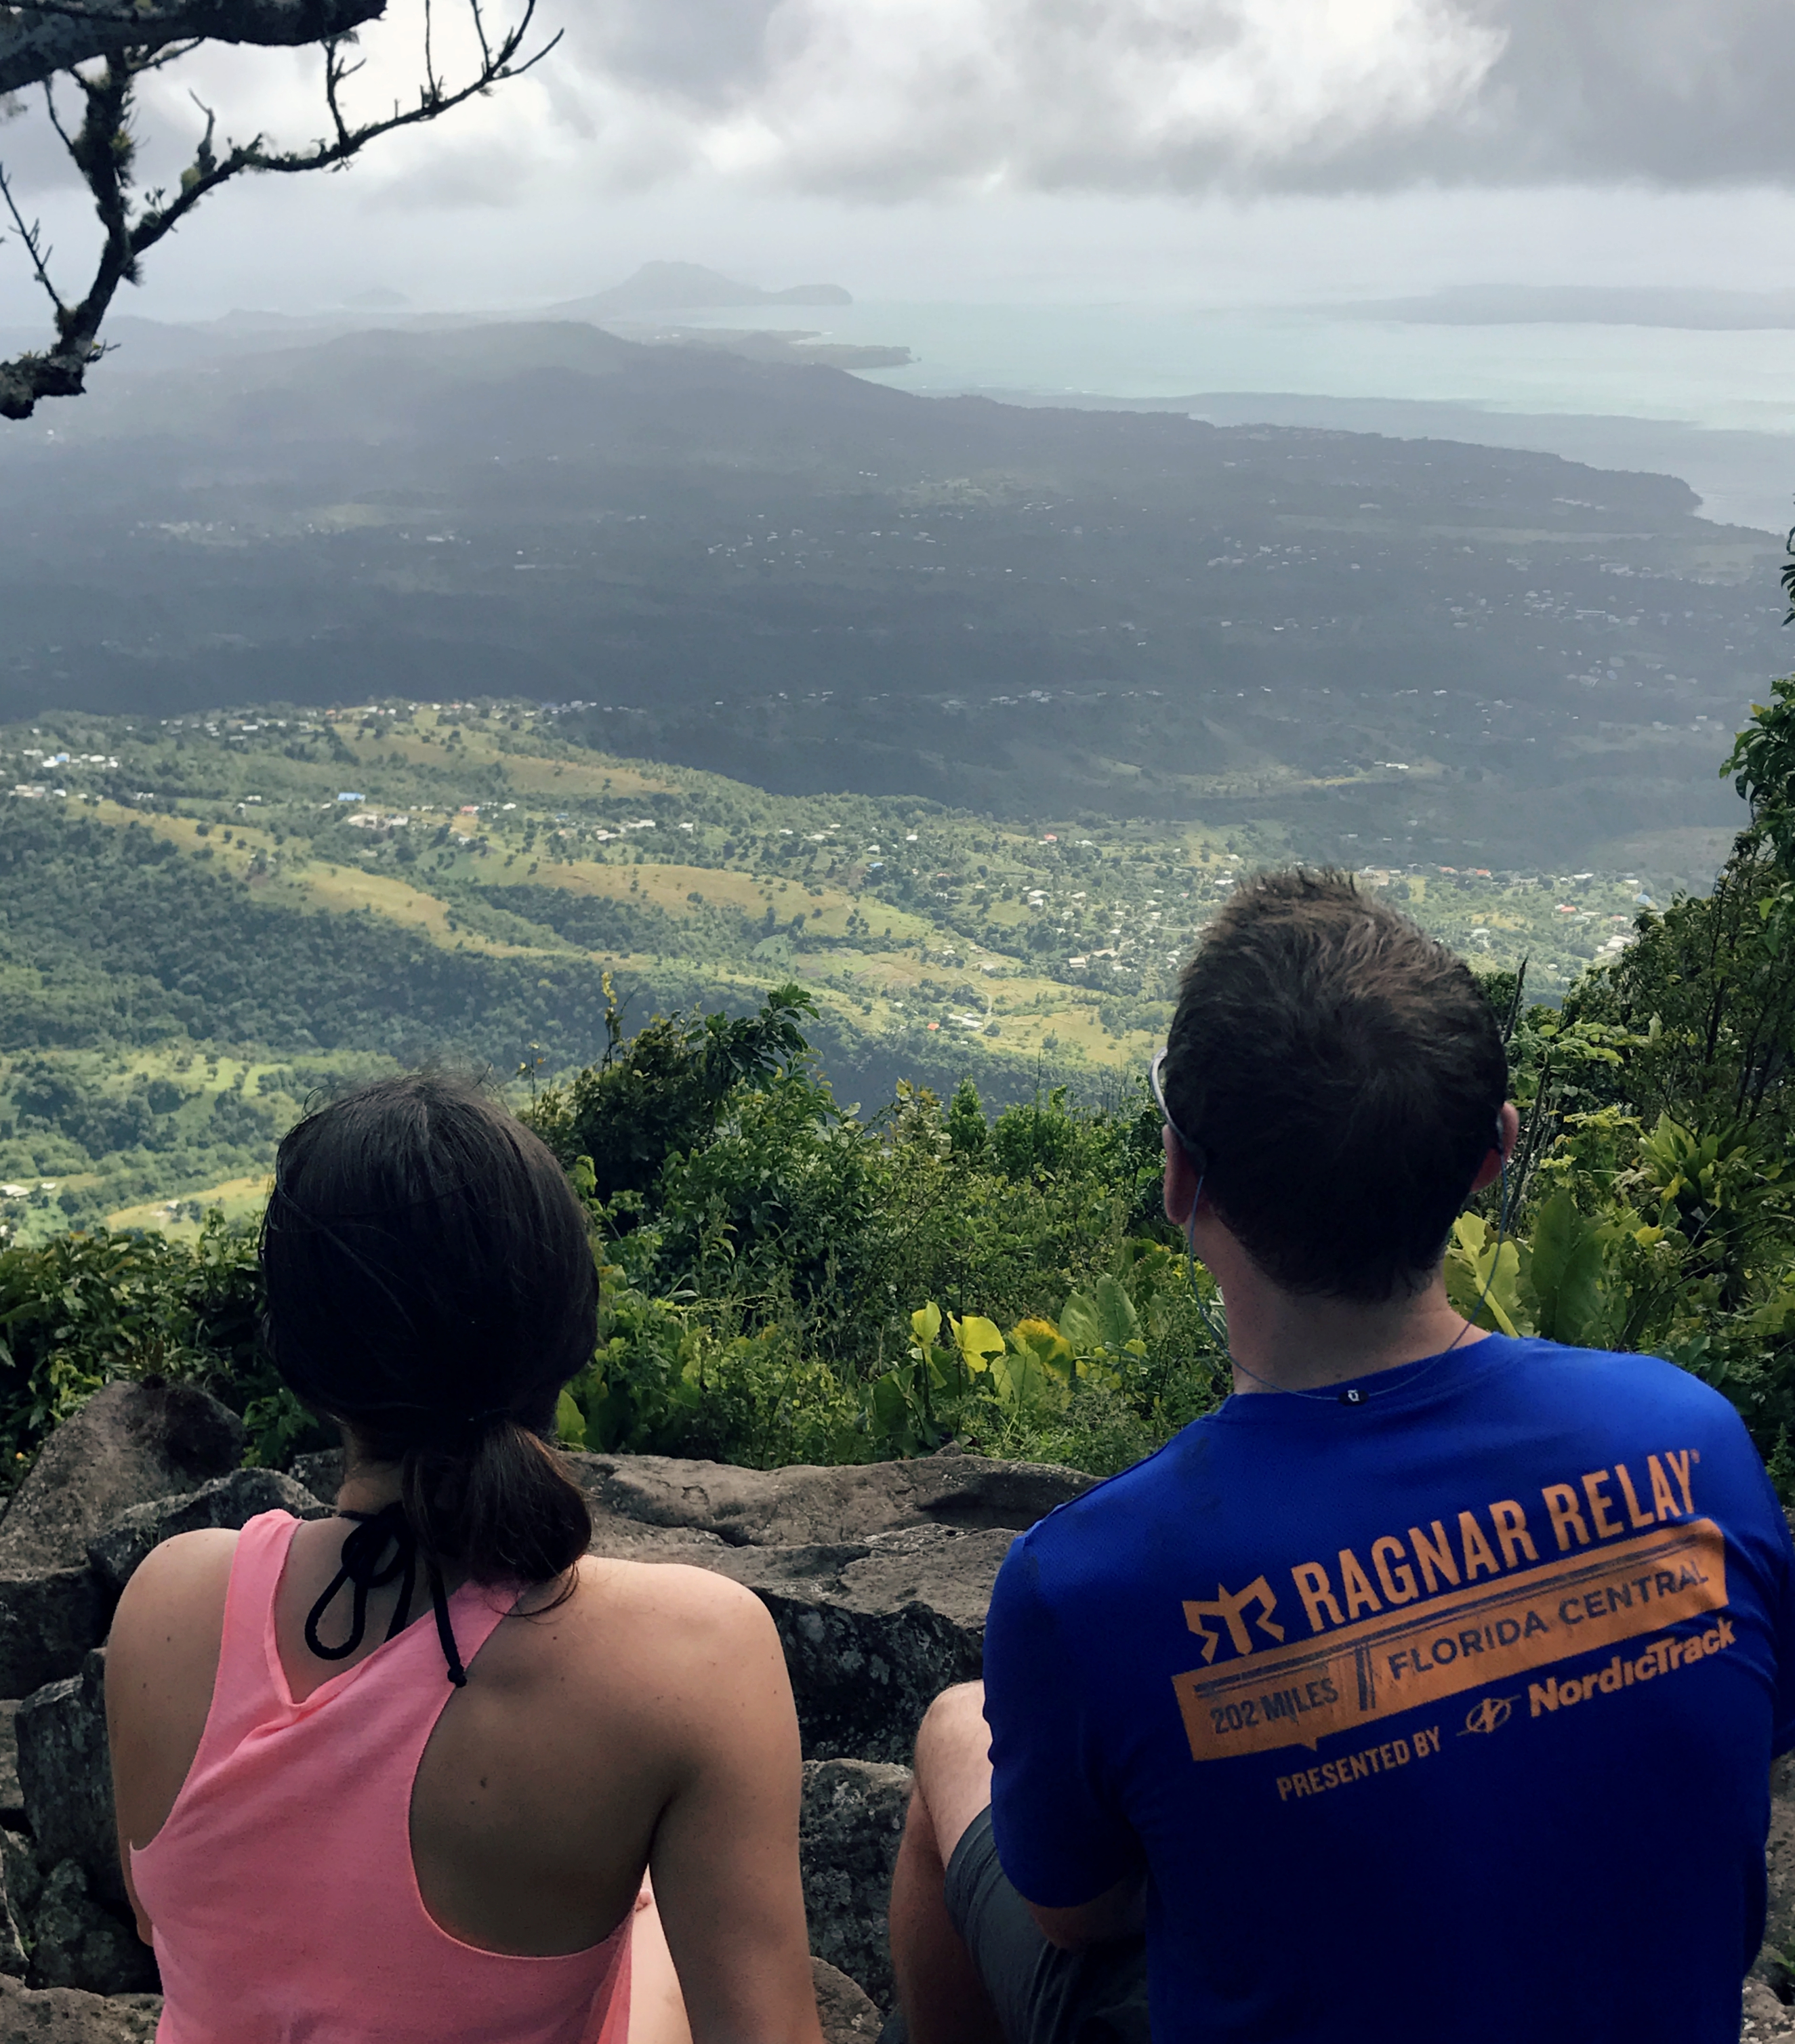 hike in st. lucia, where to hike in saint lucia, couple hiking shots, couple travel bloggers, travel blogs, hiking blogs, hiking tips, saint lucia things to do